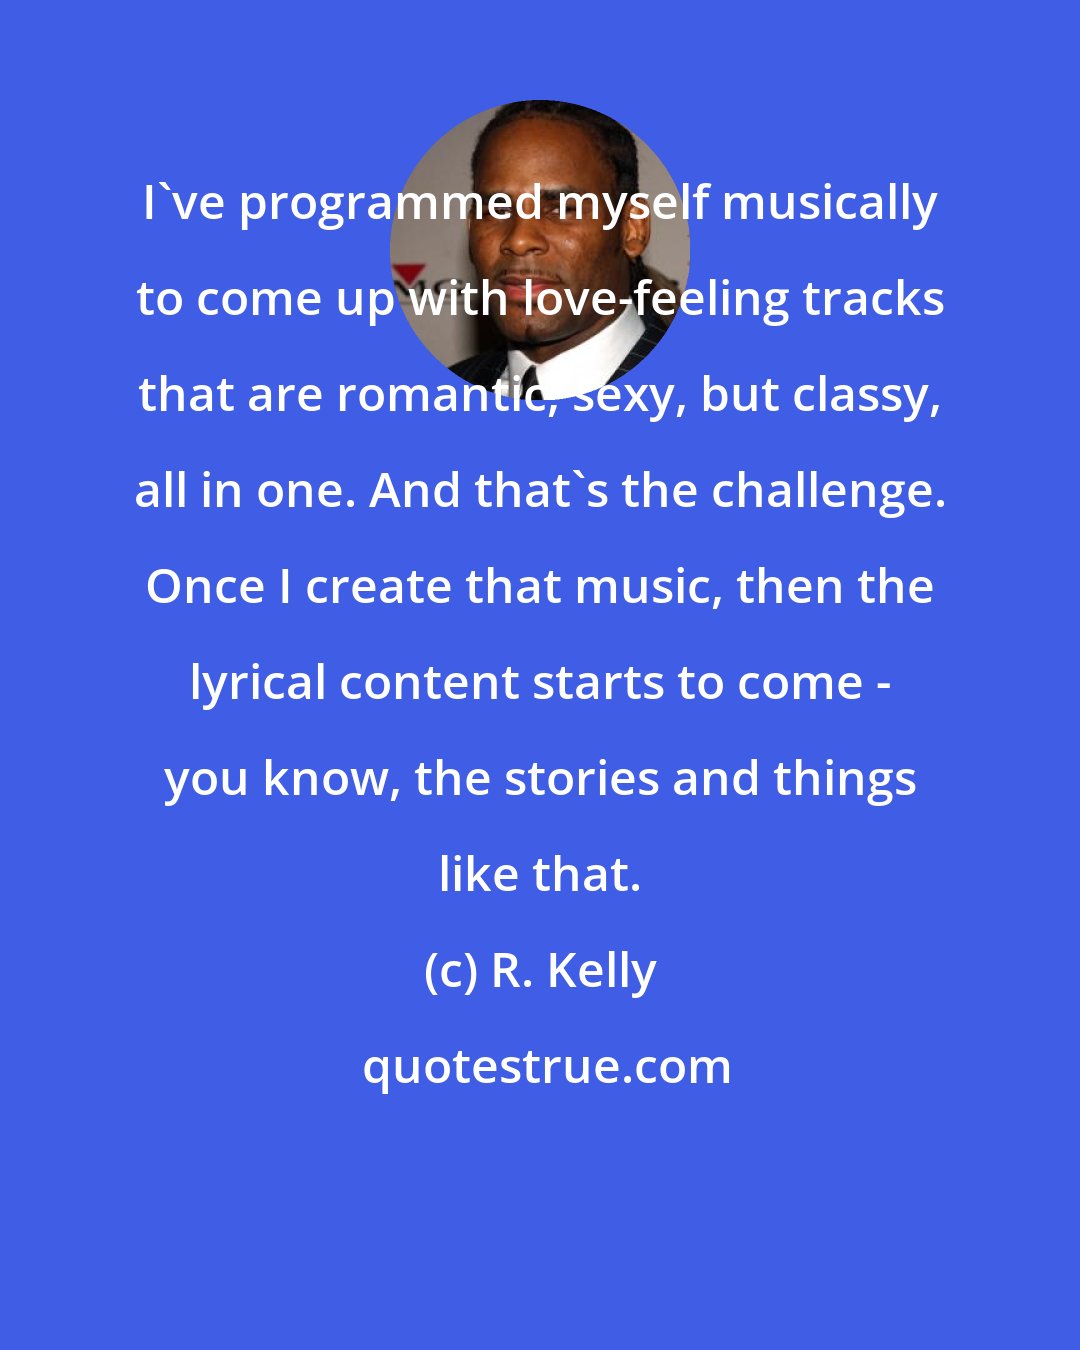 R. Kelly: I've programmed myself musically to come up with love-feeling tracks that are romantic, sexy, but classy, all in one. And that's the challenge. Once I create that music, then the lyrical content starts to come - you know, the stories and things like that.